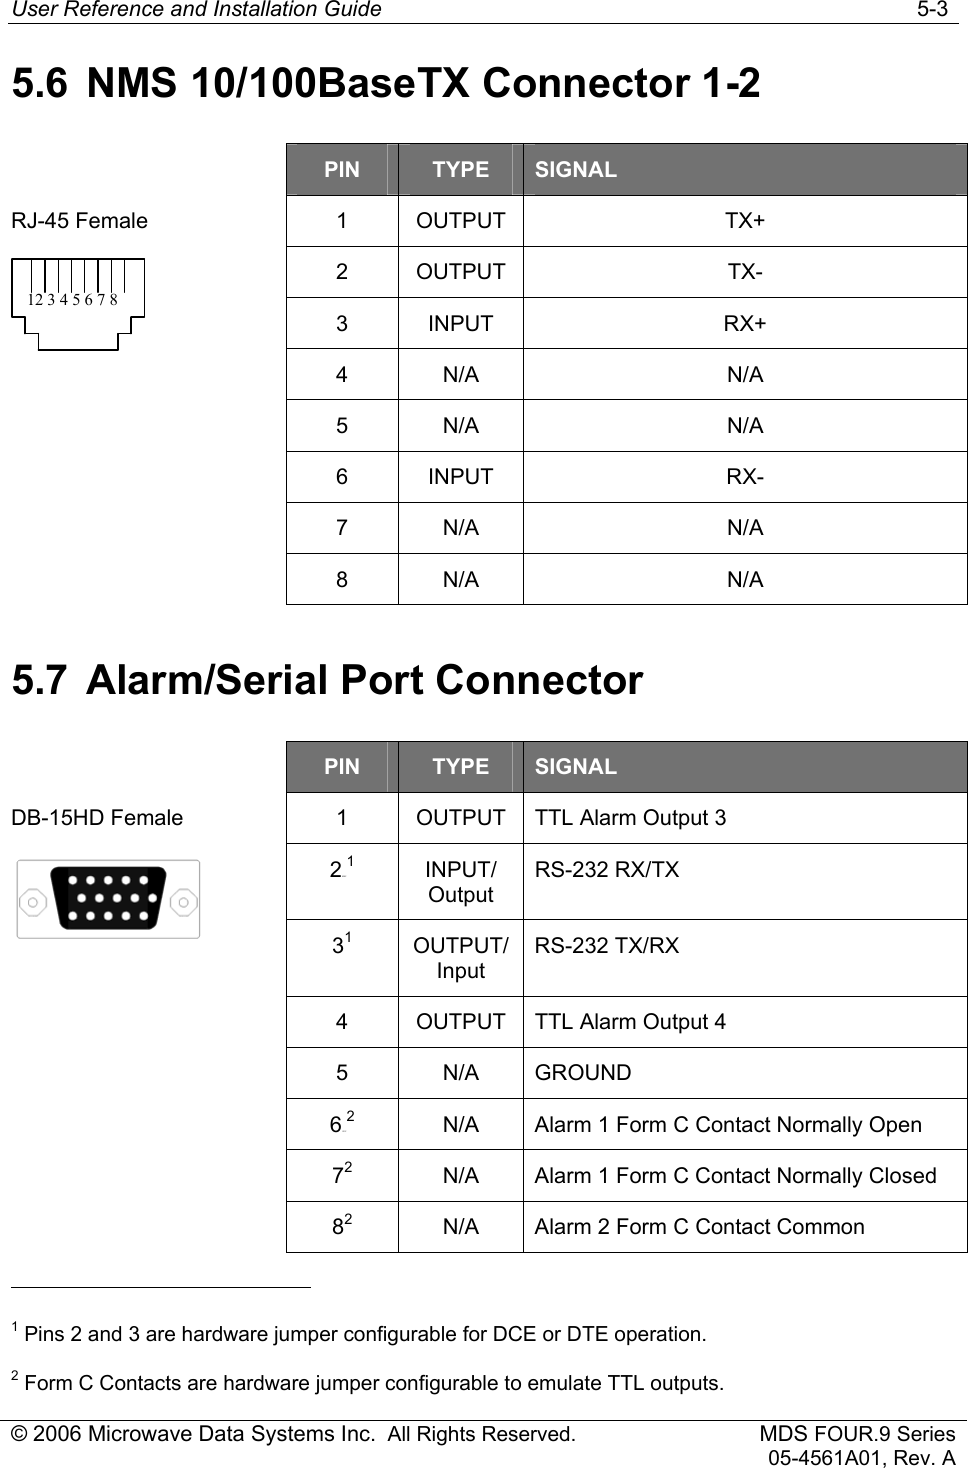 User Reference and Installation Guide   5-3 © 2006 Microwave Data Systems Inc.  All Rights Reserved. MDS FOUR.9 Series 05-4561A01, Rev. A 5.6  NMS 10/100BaseTX Connector 1-2  PIN  TYPE  SIGNAL 1 OUTPUT  TX+ 2 OUTPUT  TX- 3 INPUT  RX+ 4 N/A  N/A RJ-45 Female 12 3 4 5 6 7 8  5 N/A  N/A  6 INPUT  RX-  7 N/A  N/A  8 N/A  N/A 5.7  Alarm/Serial Port Connector  PIN  TYPE  SIGNAL 1  OUTPUT  TTL Alarm Output 3 20F0F1 INPUT/ Output RS-232 RX/TX 31 OUTPUT/ Input RS-232 TX/RX DB-15HD Female  4  OUTPUT  TTL Alarm Output 4  5 N/A GROUND  61F1F2  N/A  Alarm 1 Form C Contact Normally Open  72  N/A  Alarm 1 Form C Contact Normally Closed  82  N/A  Alarm 2 Form C Contact Common                                                   1 Pins 2 and 3 are hardware jumper configurable for DCE or DTE operation. 2 Form C Contacts are hardware jumper configurable to emulate TTL outputs. 